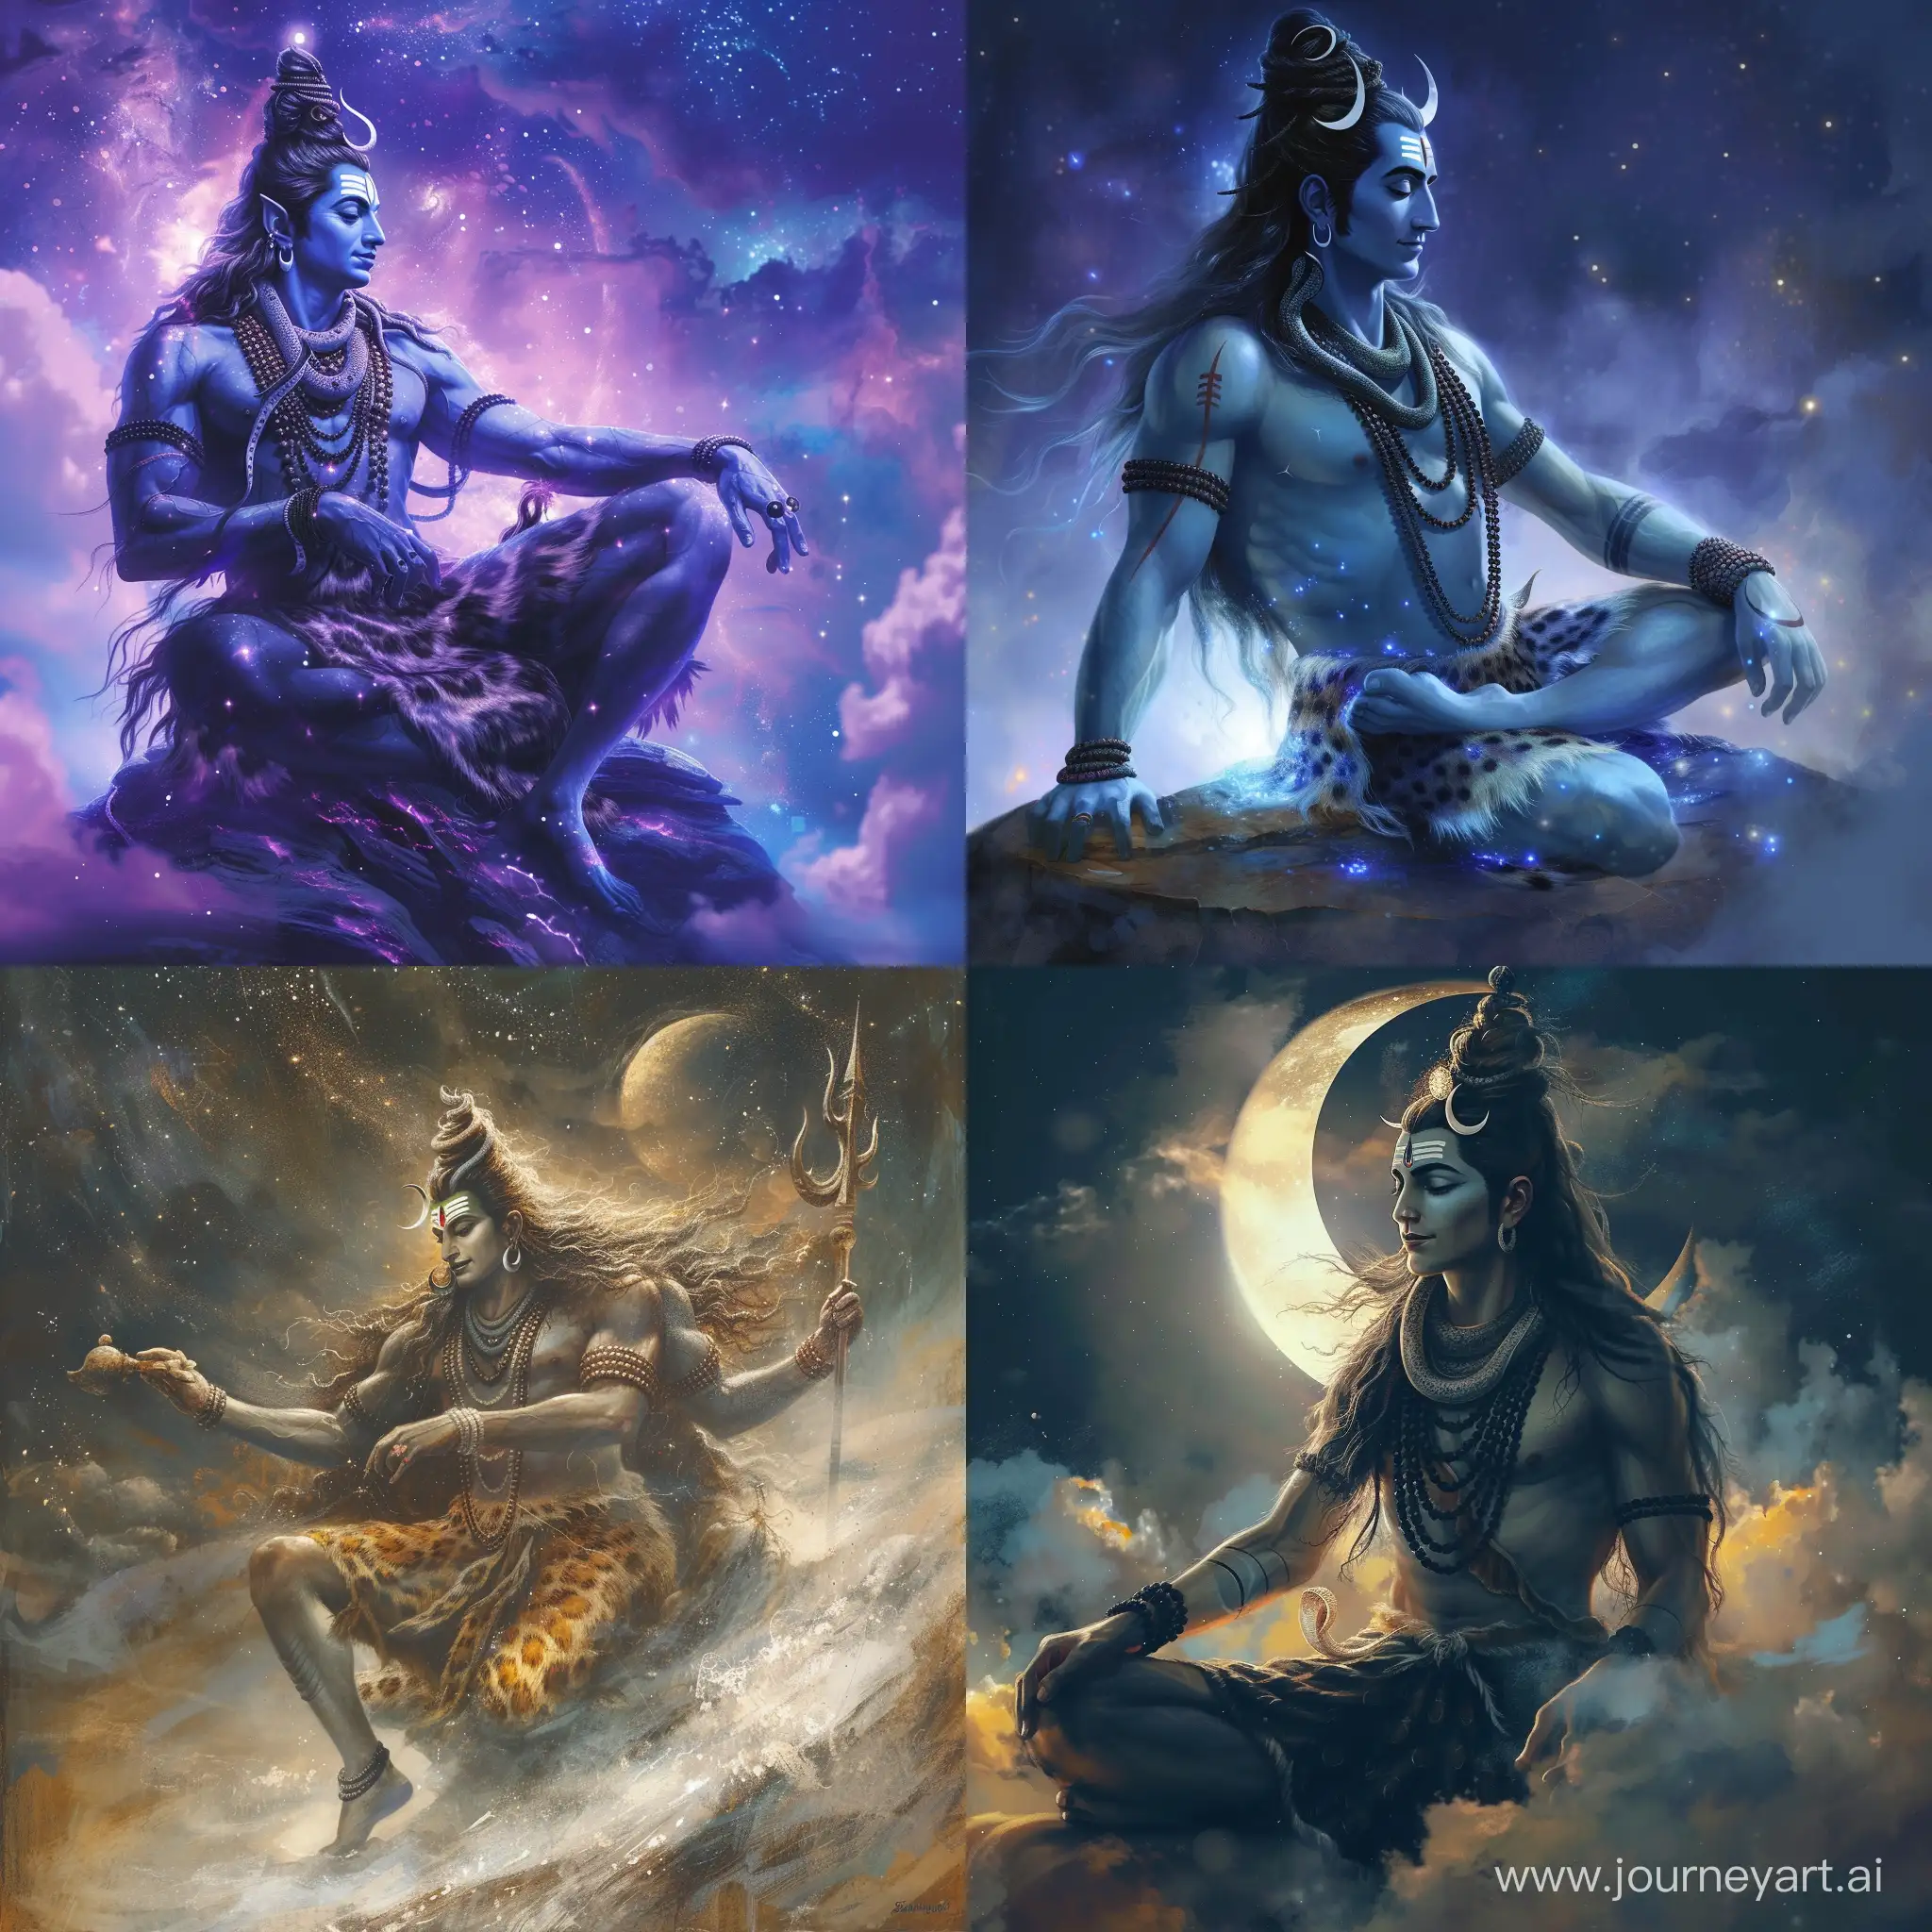 Lord Shiva creating the universe.